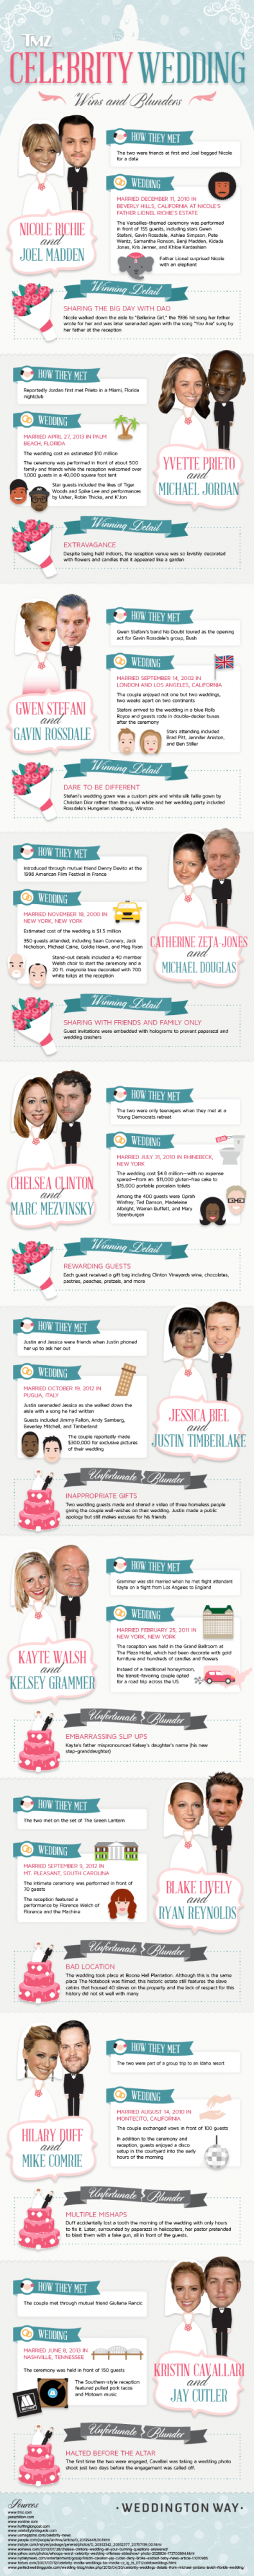 The Ultimate Guide to Celebrity Weddings